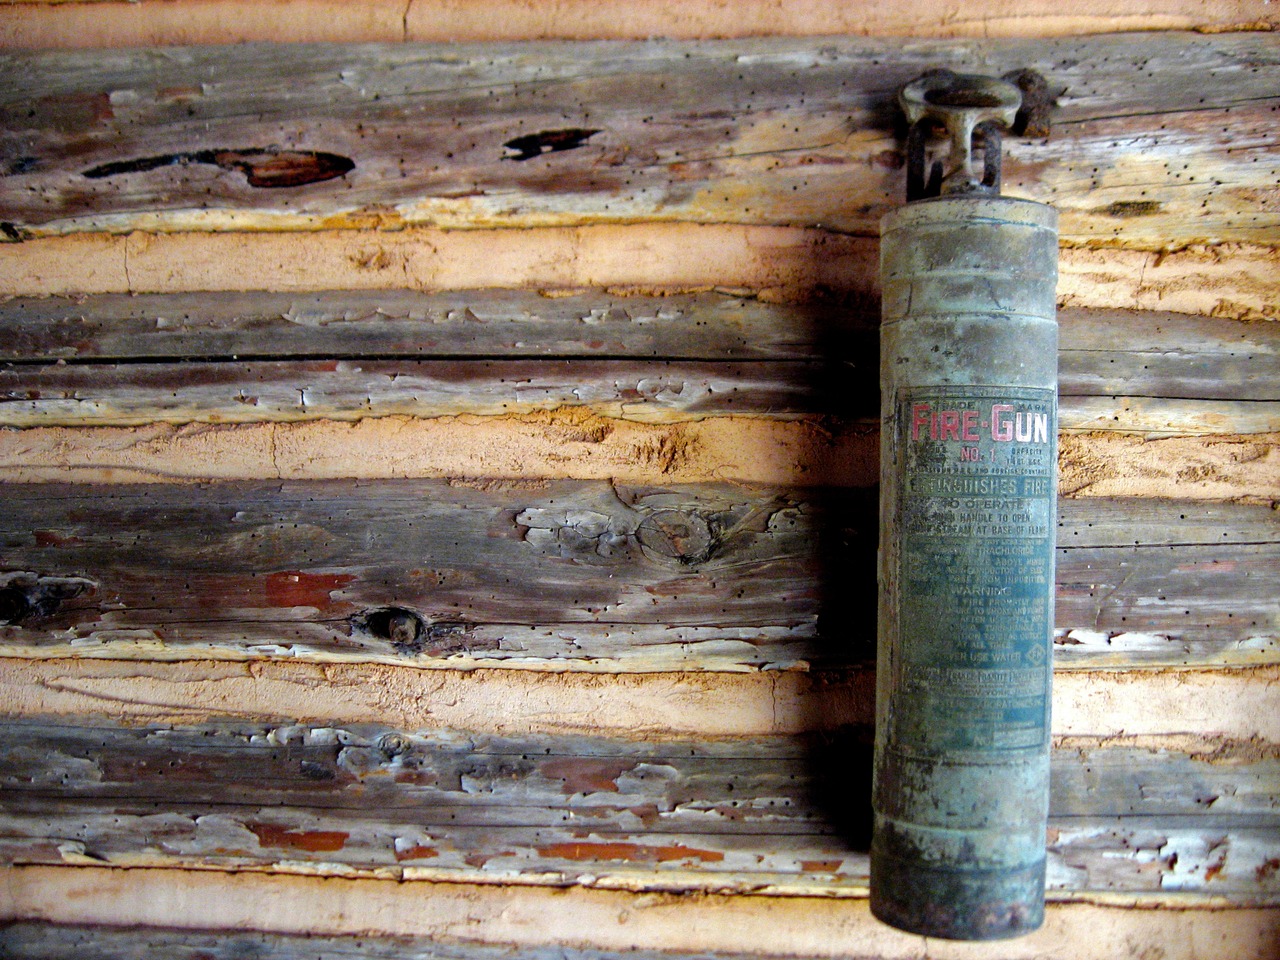 Vintage Fire-Gun No. 1 fire extinguisher by American-LaFrance Foamite Corporation of Elmira, New York in the Log Cabin School (1901) at Pebble Hill Plantation.